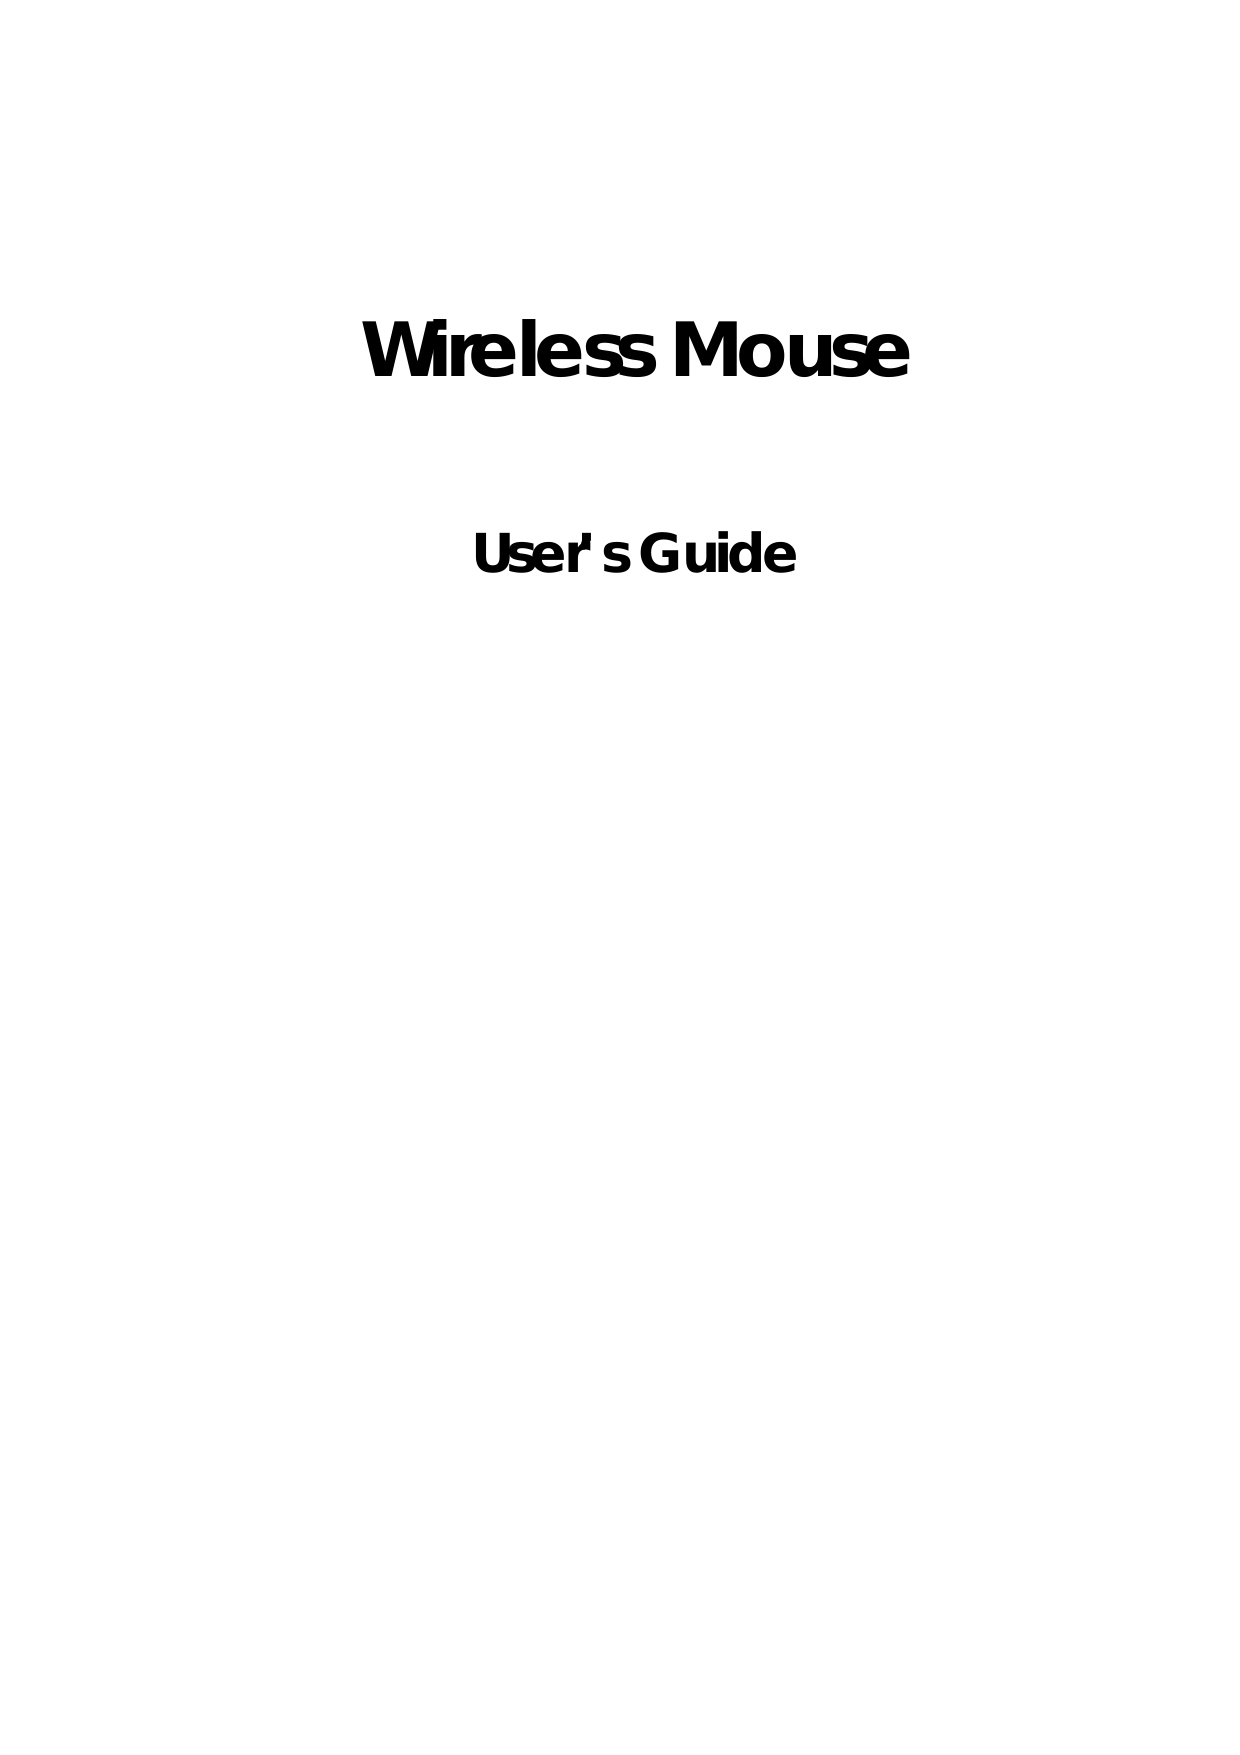 Wireless MouseUser’s Guide